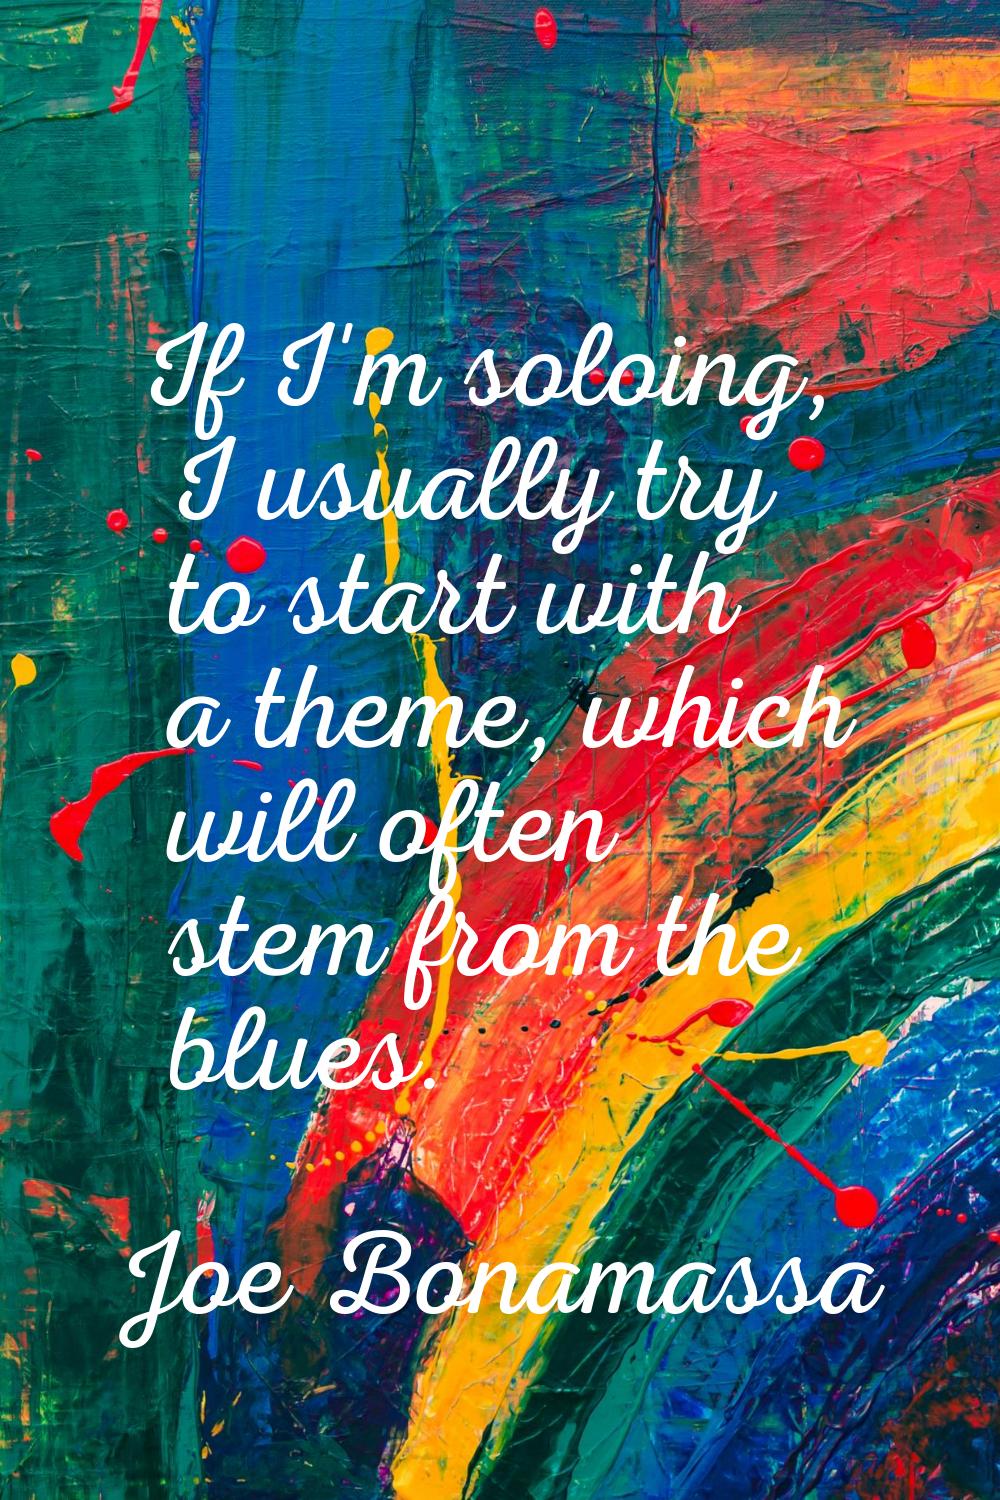 If I'm soloing, I usually try to start with a theme, which will often stem from the blues.